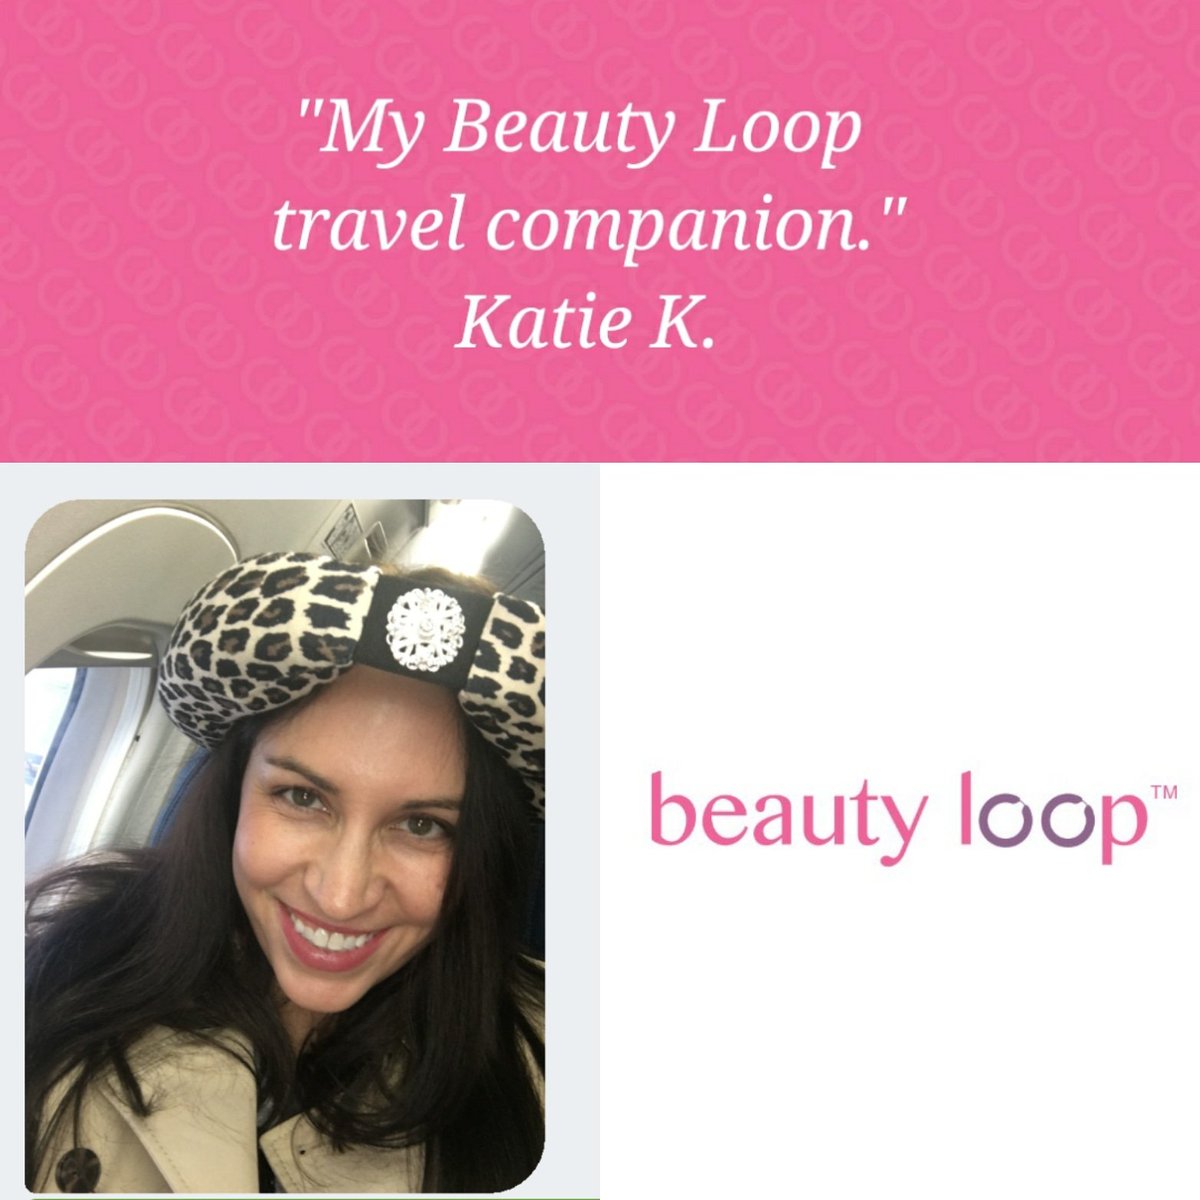 #MyBeautyLoop makes a super cute #travelpillow too! Thank you Katie for sharing your photo! #Bonvoyage!! ❤️ #travelblogger #travelchic #travelpillows #neckpillow #necksupport #travelinstyle #antiagingpillow #antiwrinklepillow #beautyloop #Beautylooppillow #Oscars #bbloggers